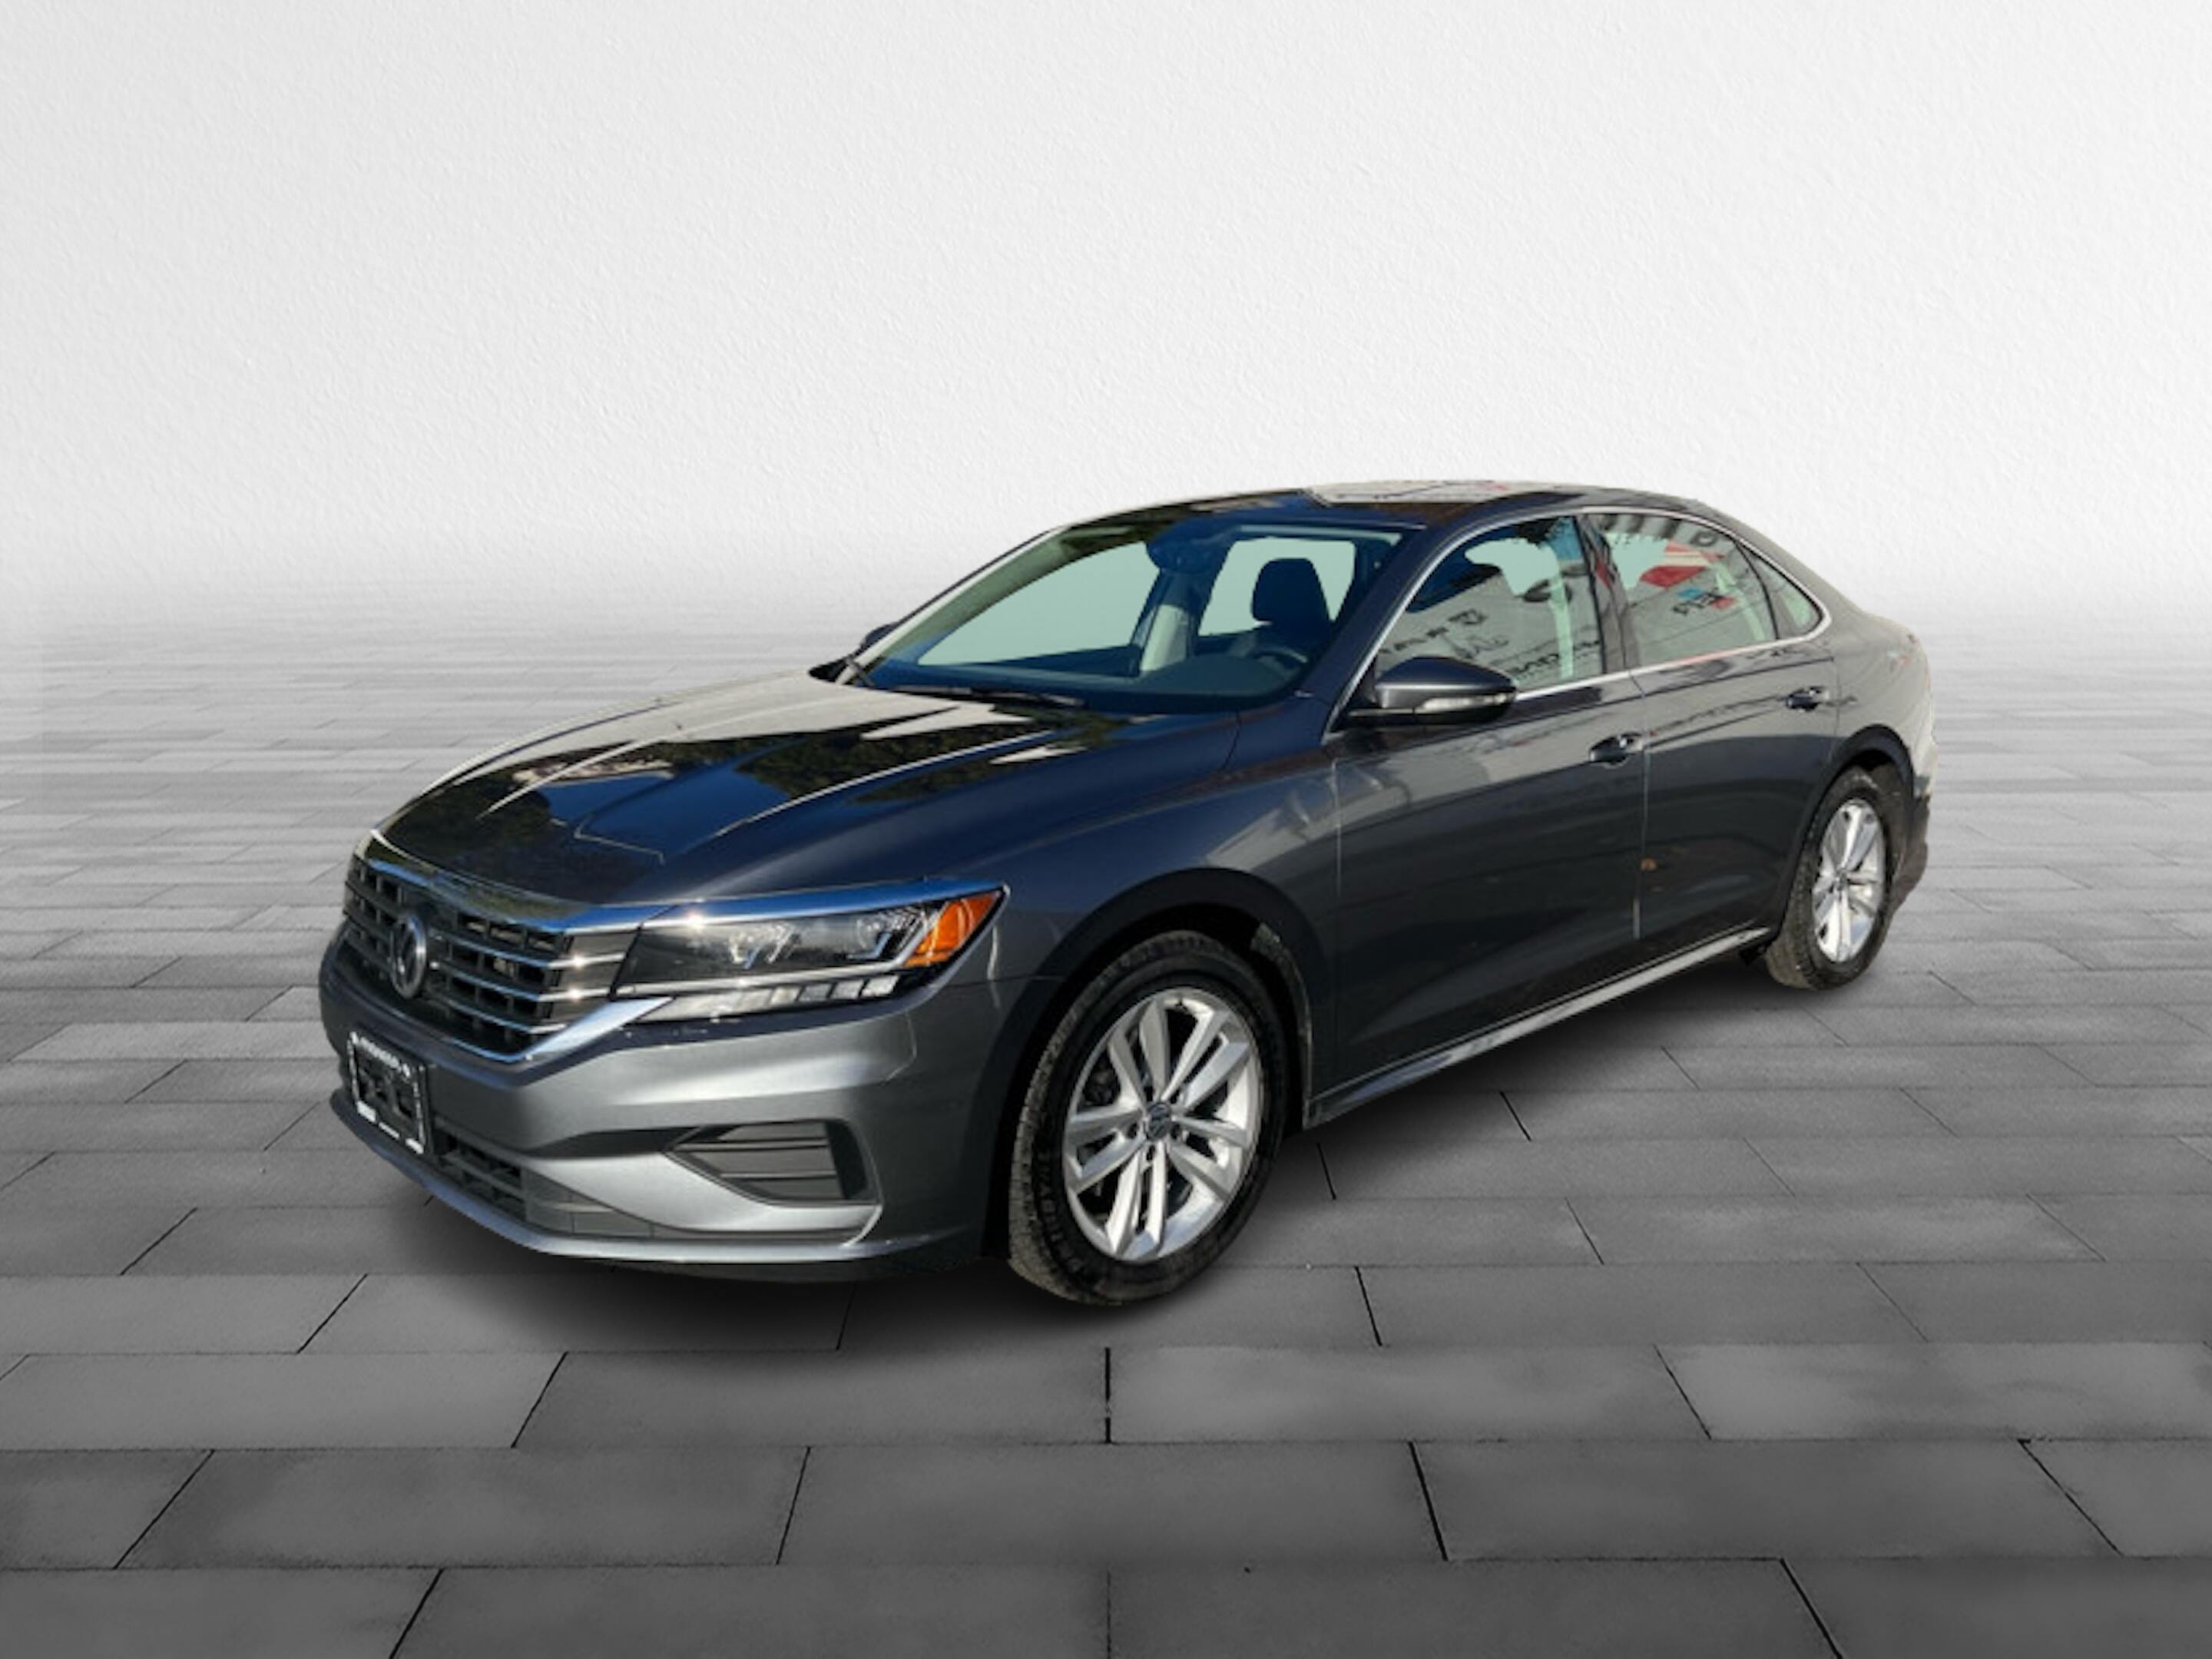 2021 Volkswagen Passat Highline  - Android Auto - $192 B/W [
  "Android 